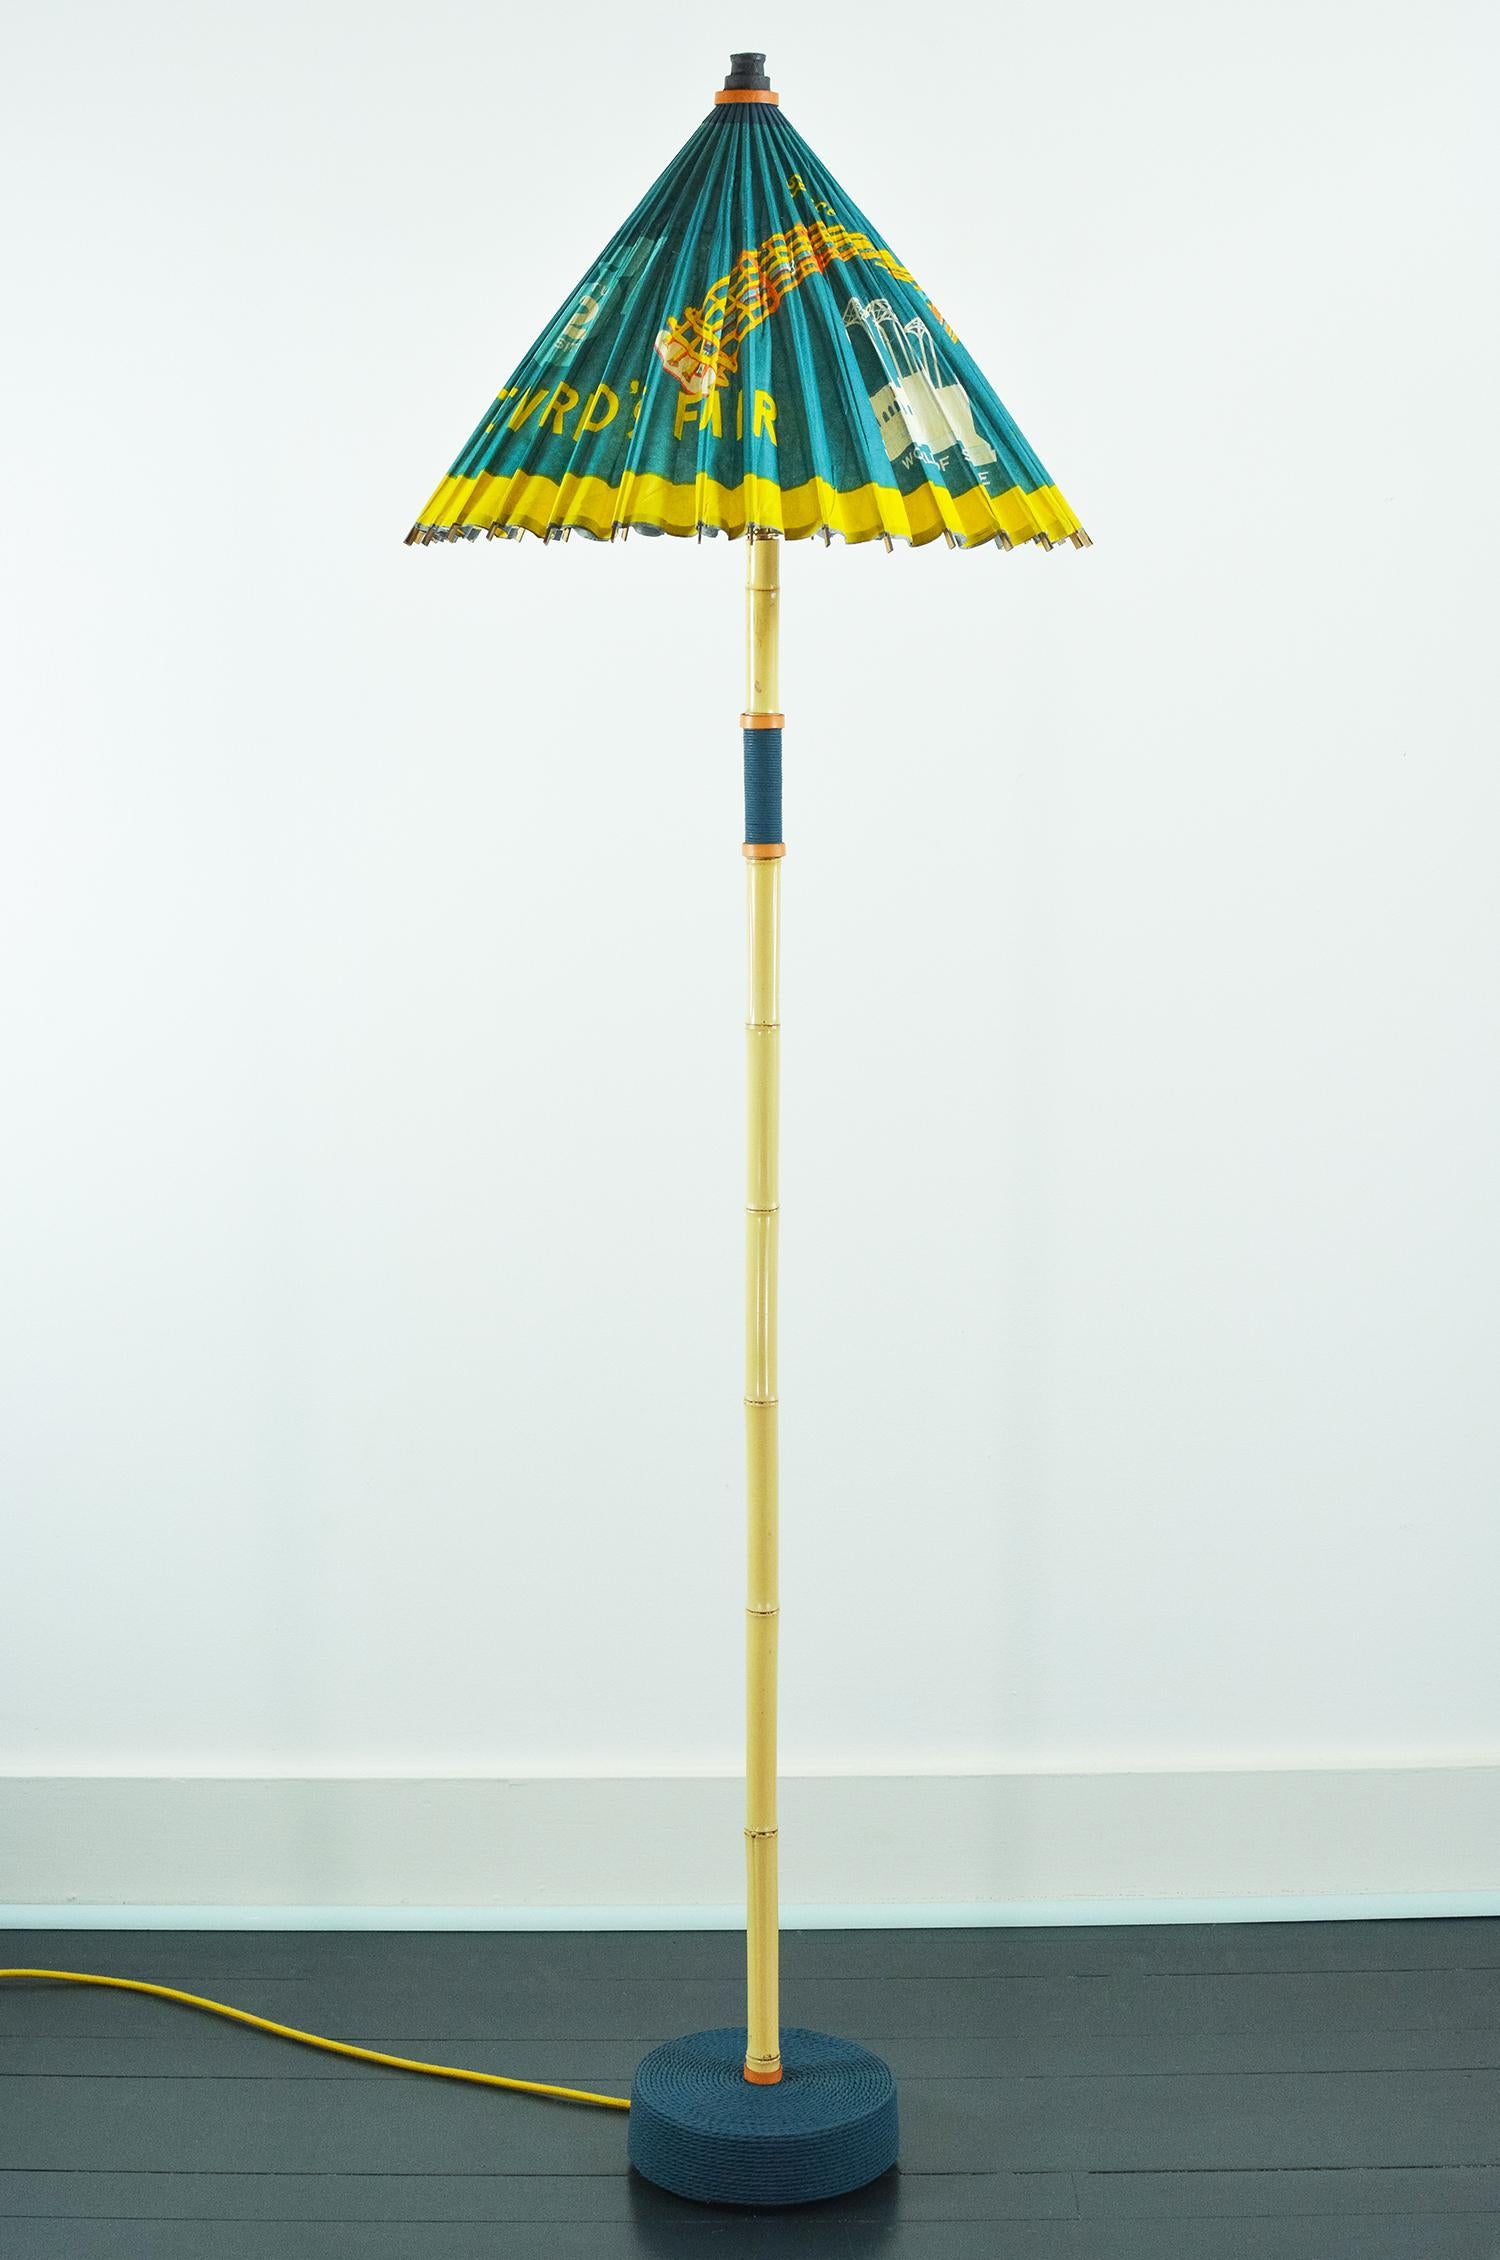 The World’s Fair Collection is a family of fixtures handmade from sustainably sourced materials and upcycled antique paper parasols given to visitors at the 20th century’s most illustrious cultural expo.

Model No. 002 features a rice-paper shade